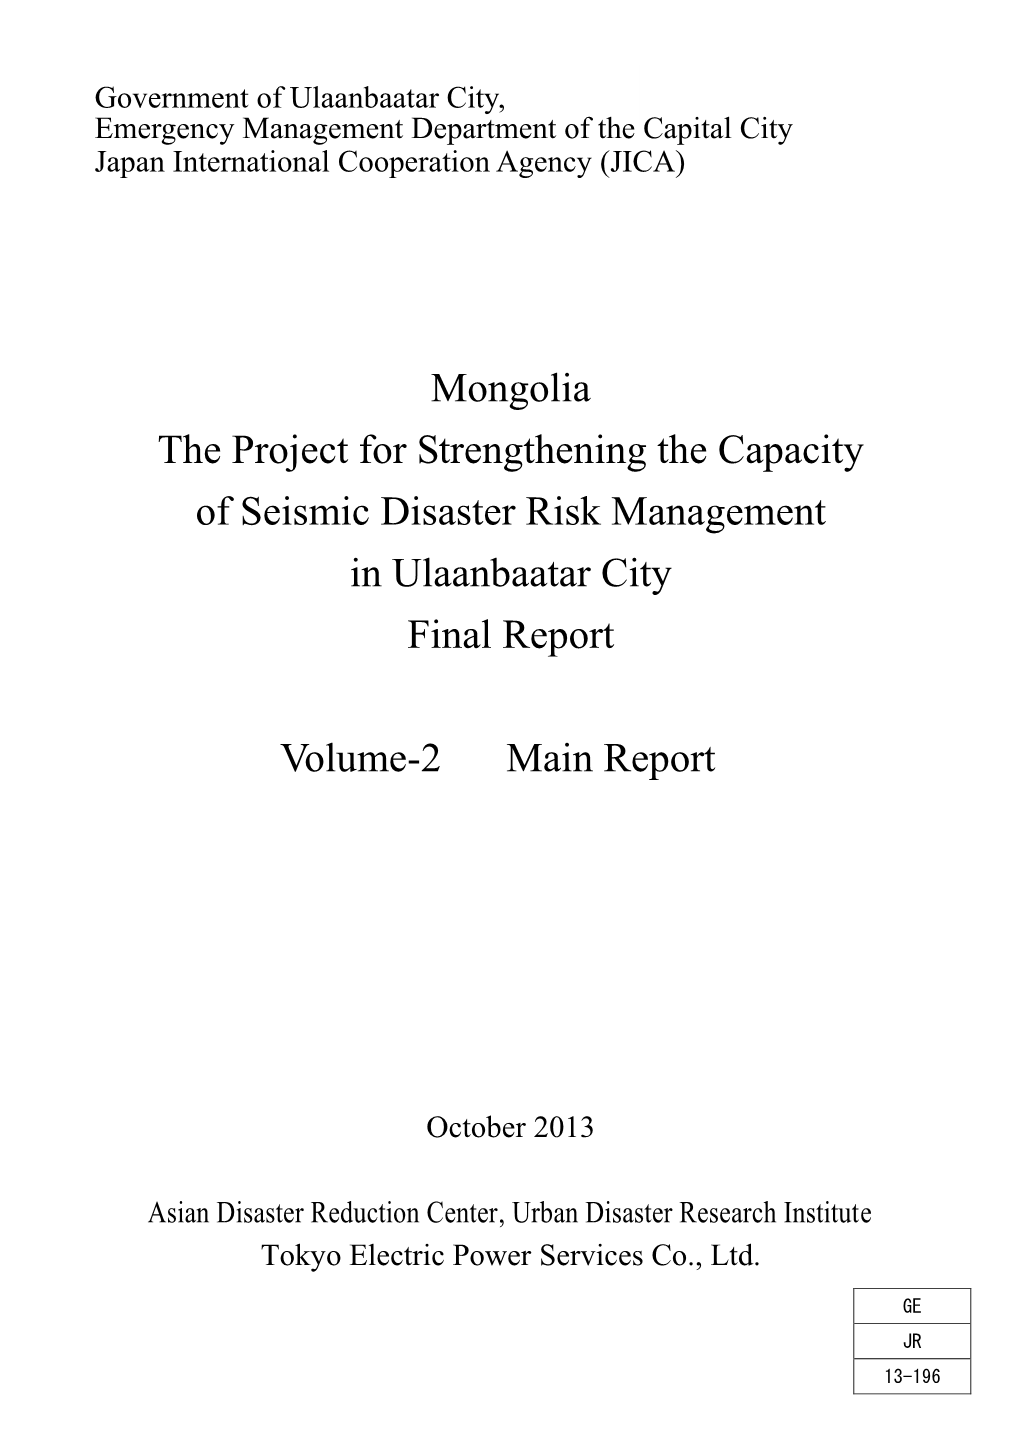 Mongolia the Project for Strengthening the Capacity of Seismic Disaster Risk Management in Ulaanbaatar City Final Report